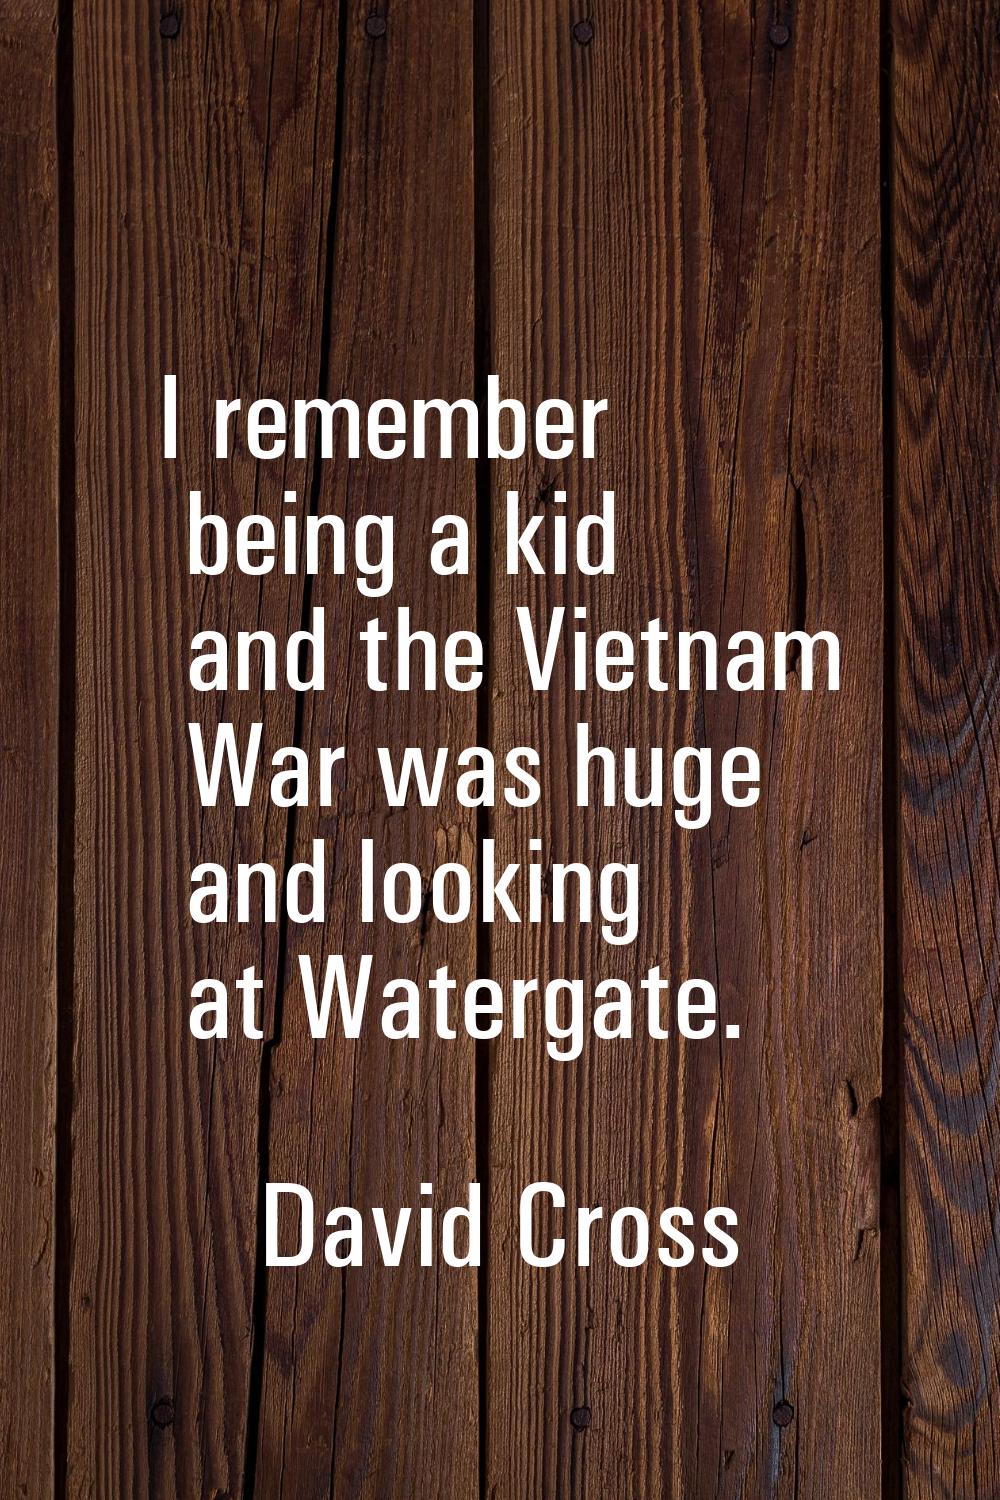 I remember being a kid and the Vietnam War was huge and looking at Watergate.